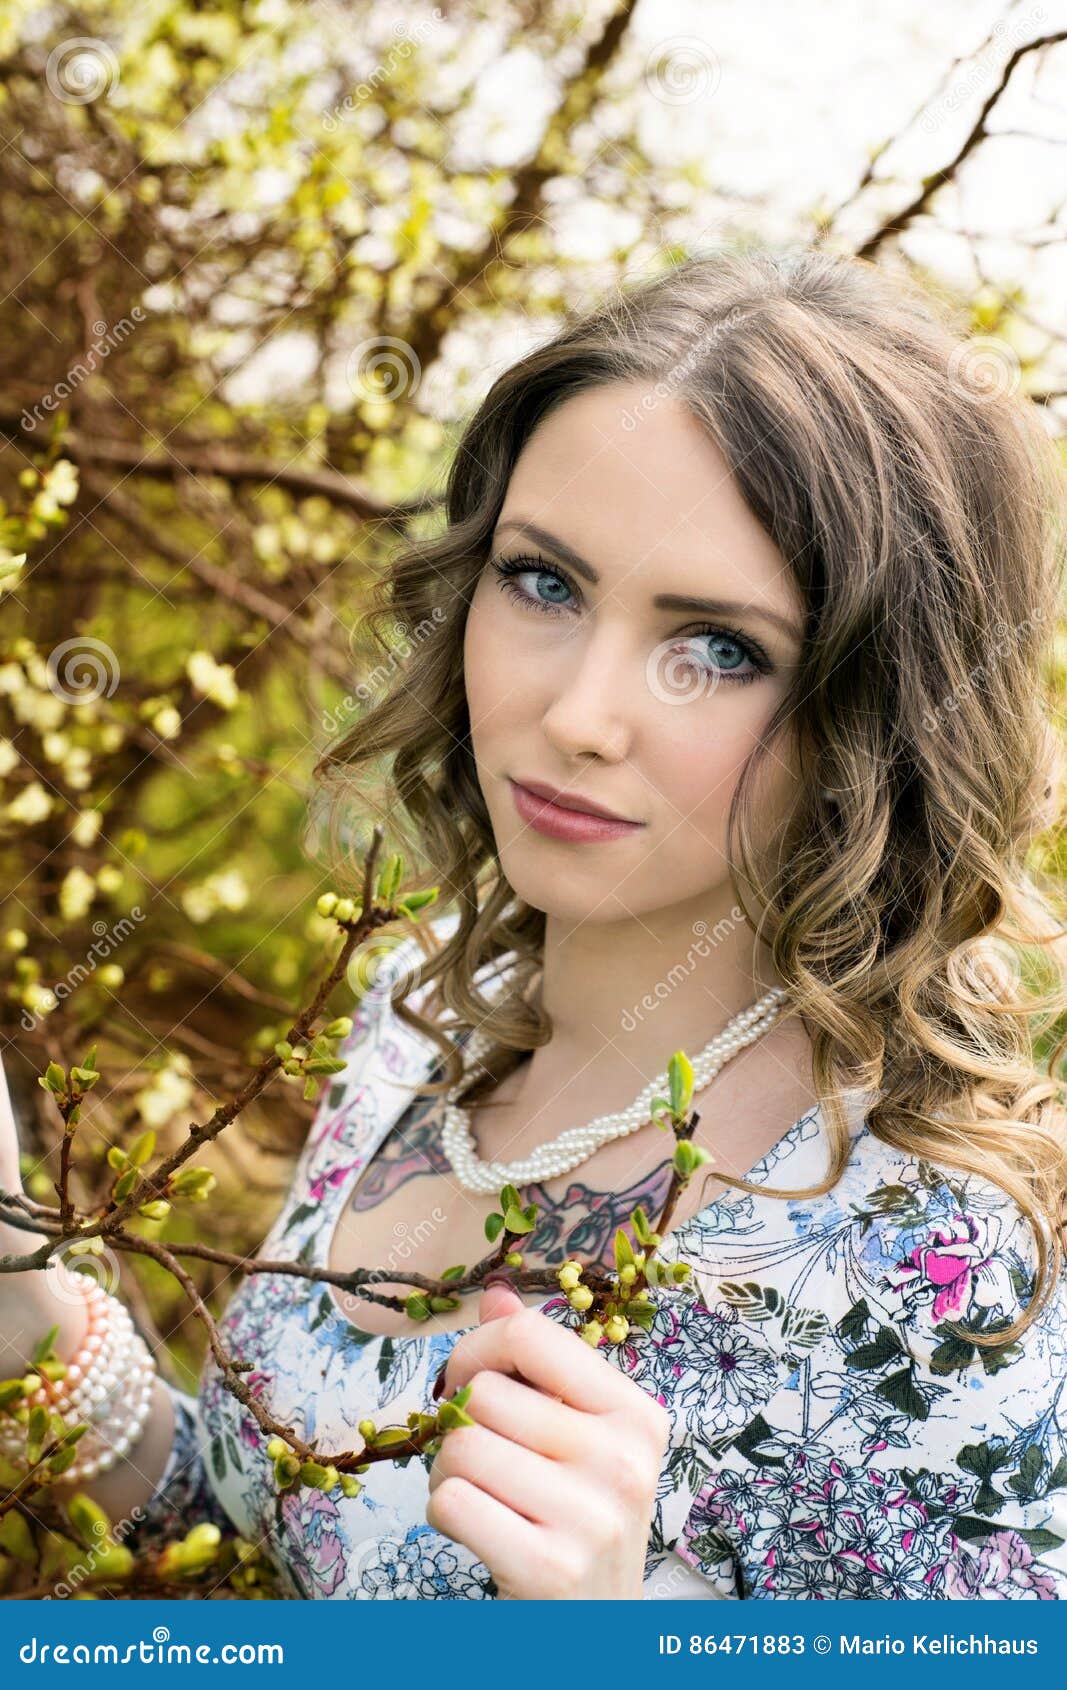 Springtime stock image. Image of woman, curly, brunette - 86471883